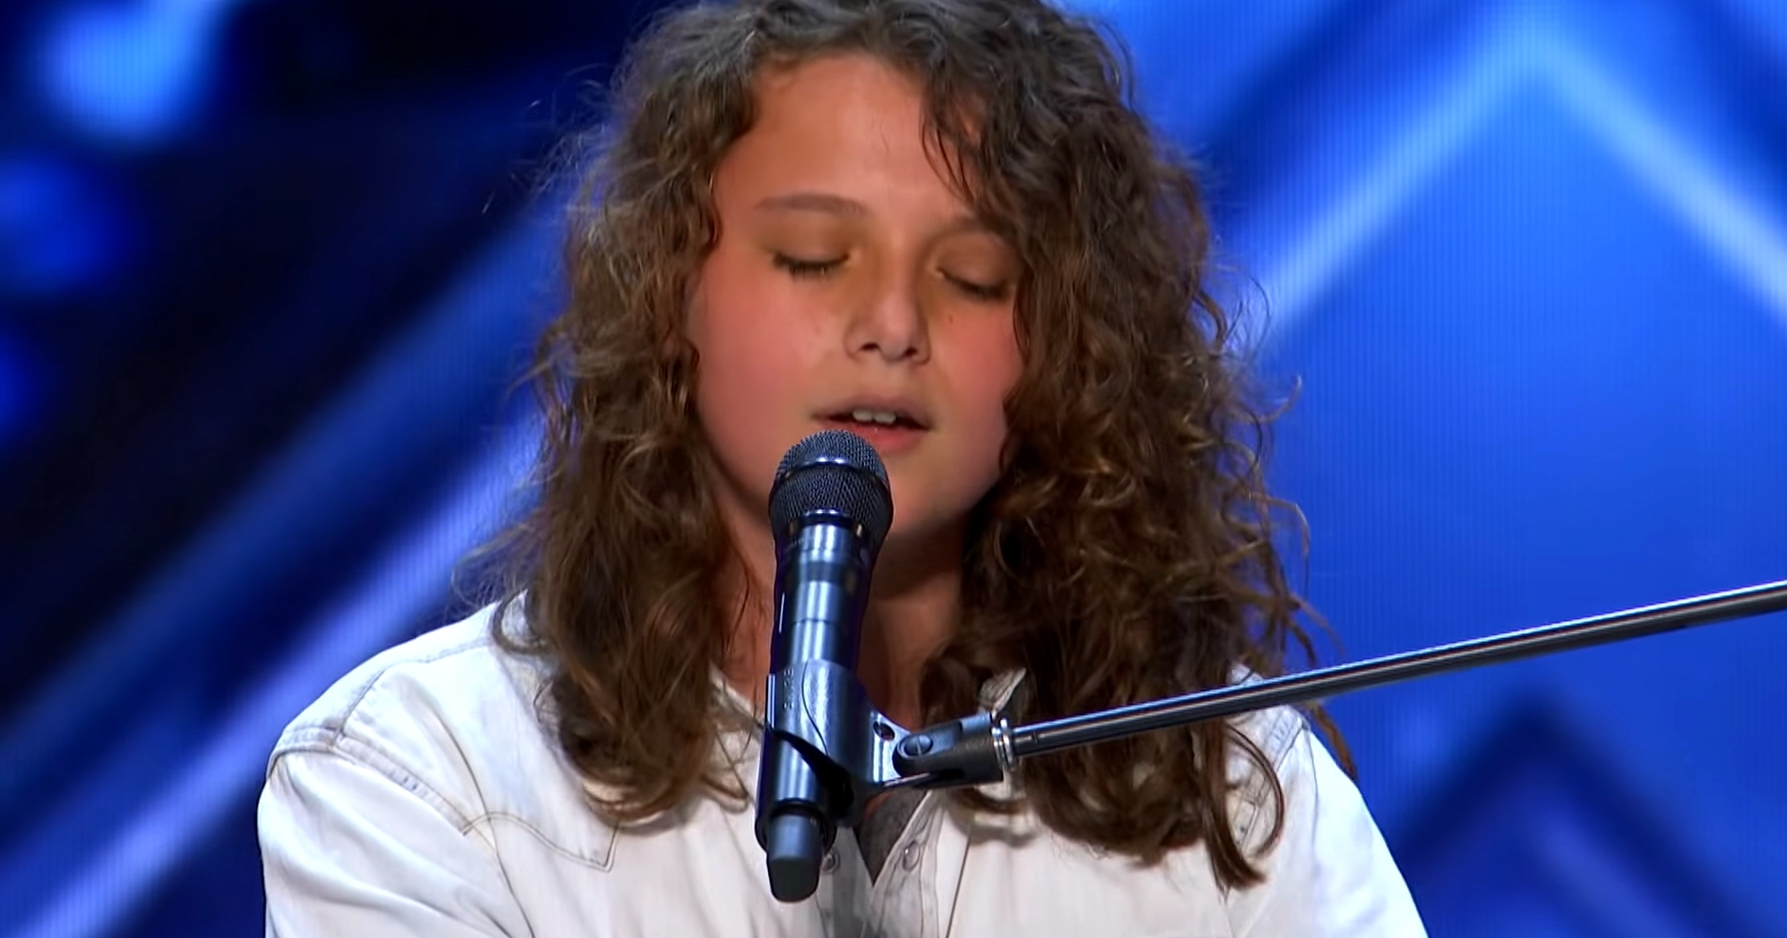 14YearOld Powerhouse Singer Astonishes 'AGT' Fans with A Voice beyond